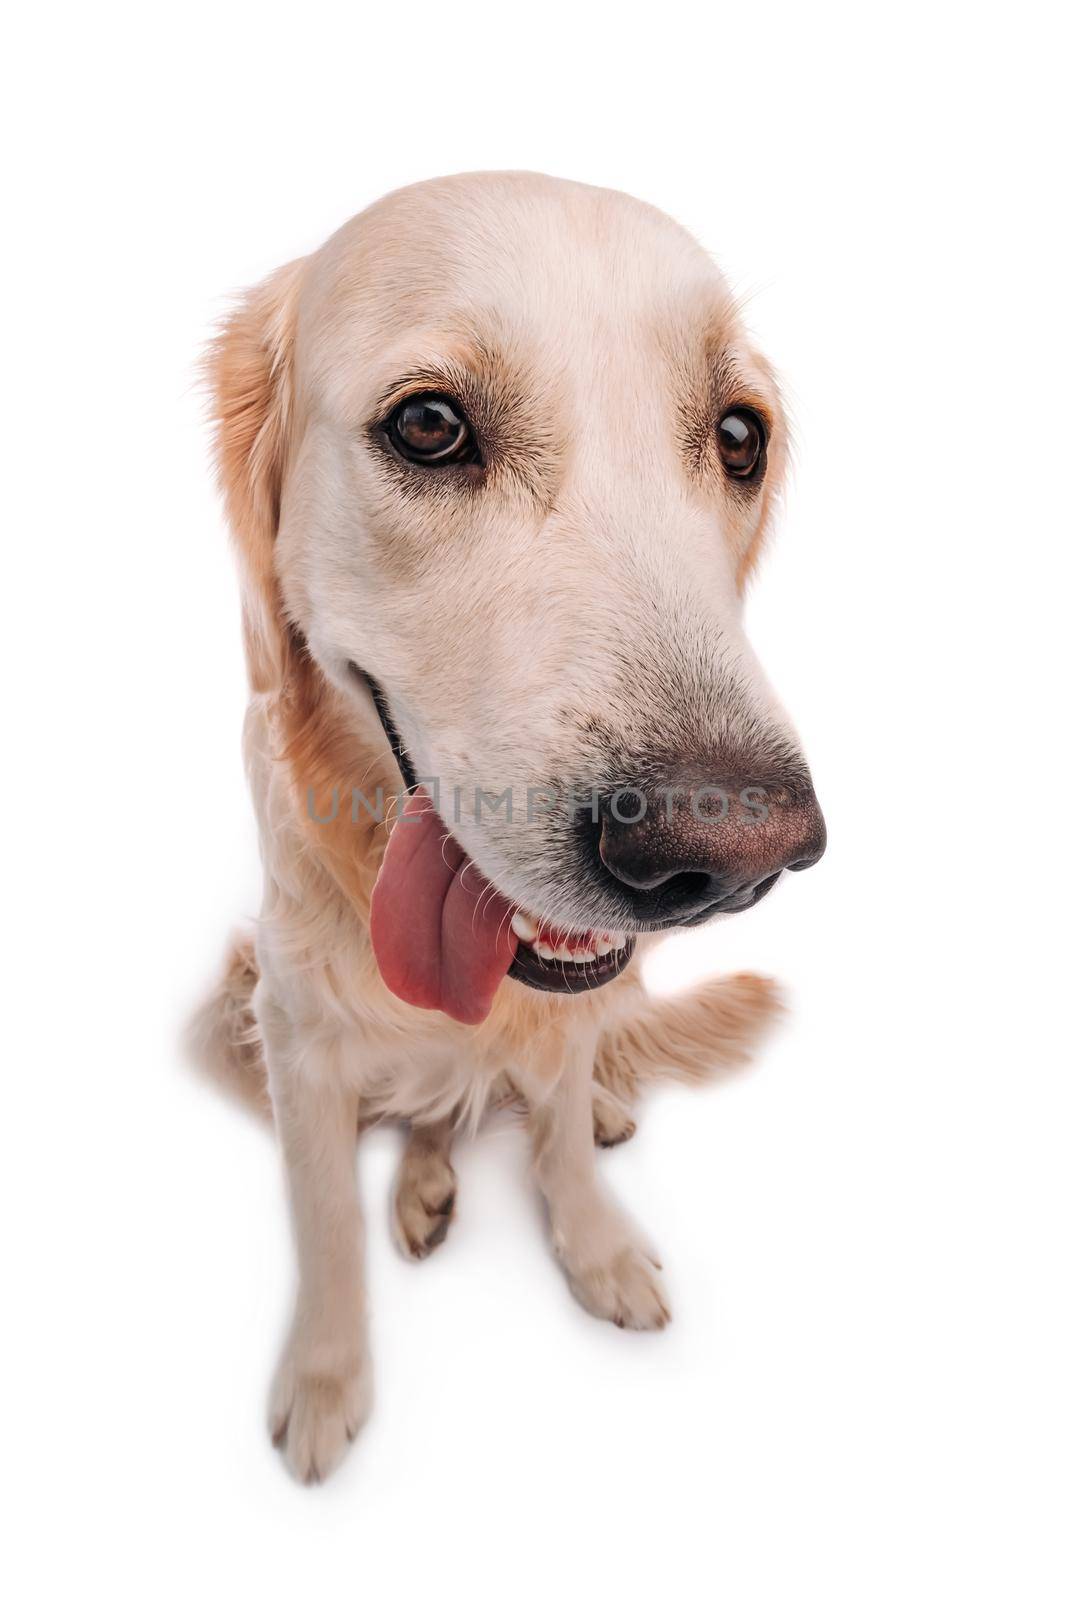 Adorable golden retriever dog isolated on white background. Beautiful doggy labrador sitting with tonque out and looking back. Portrait of cute funny pet.